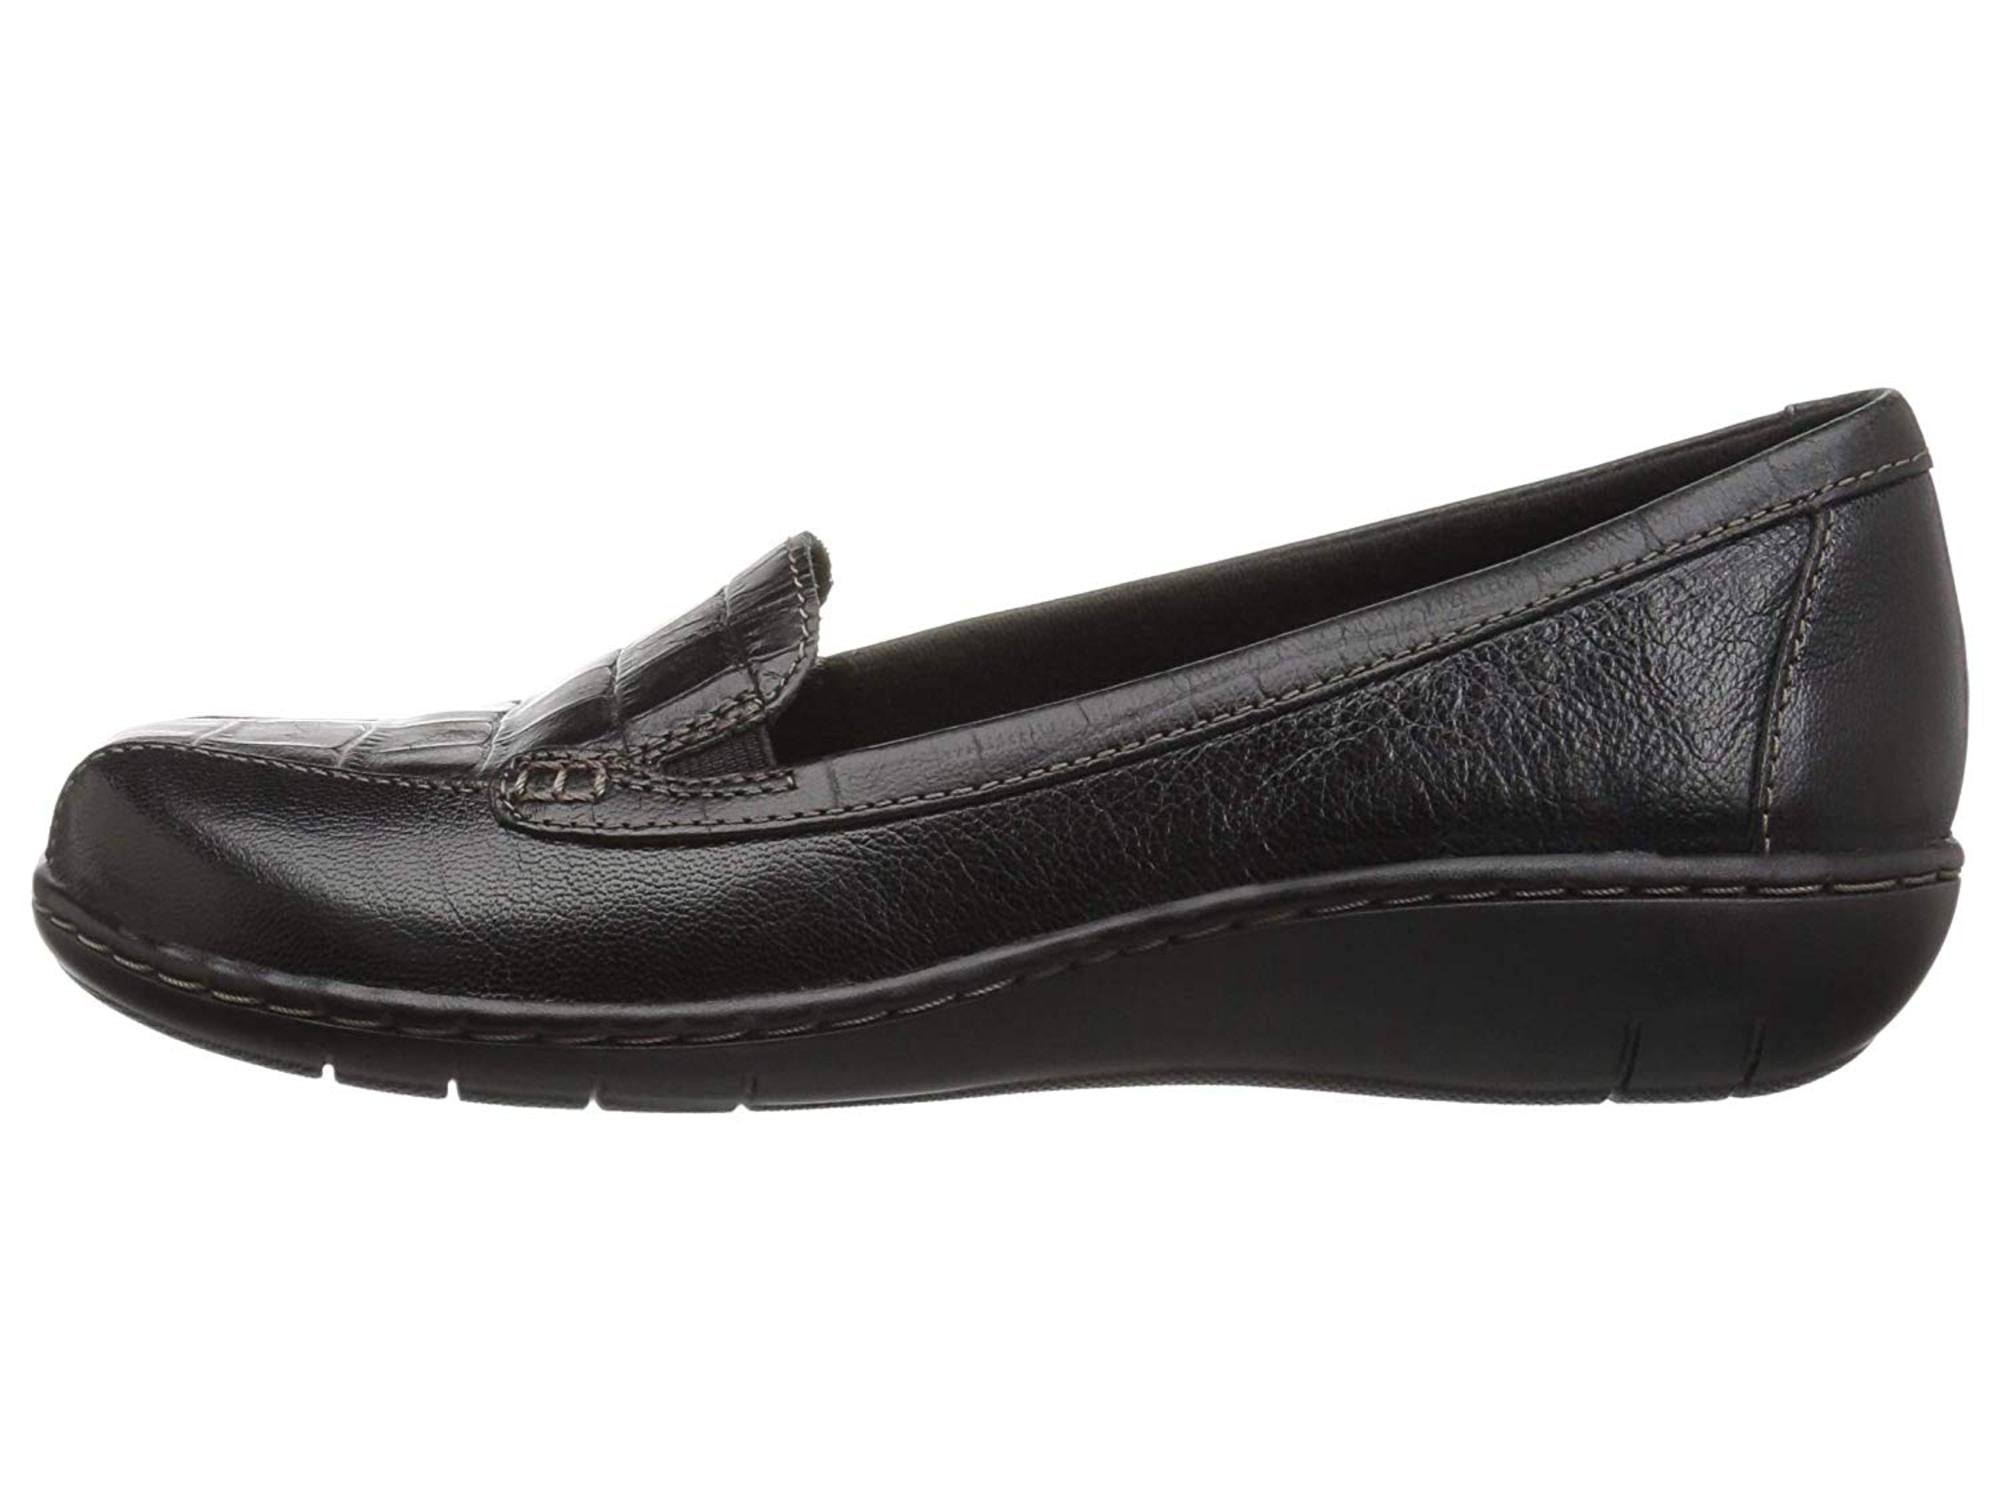 black loafers size 5.5